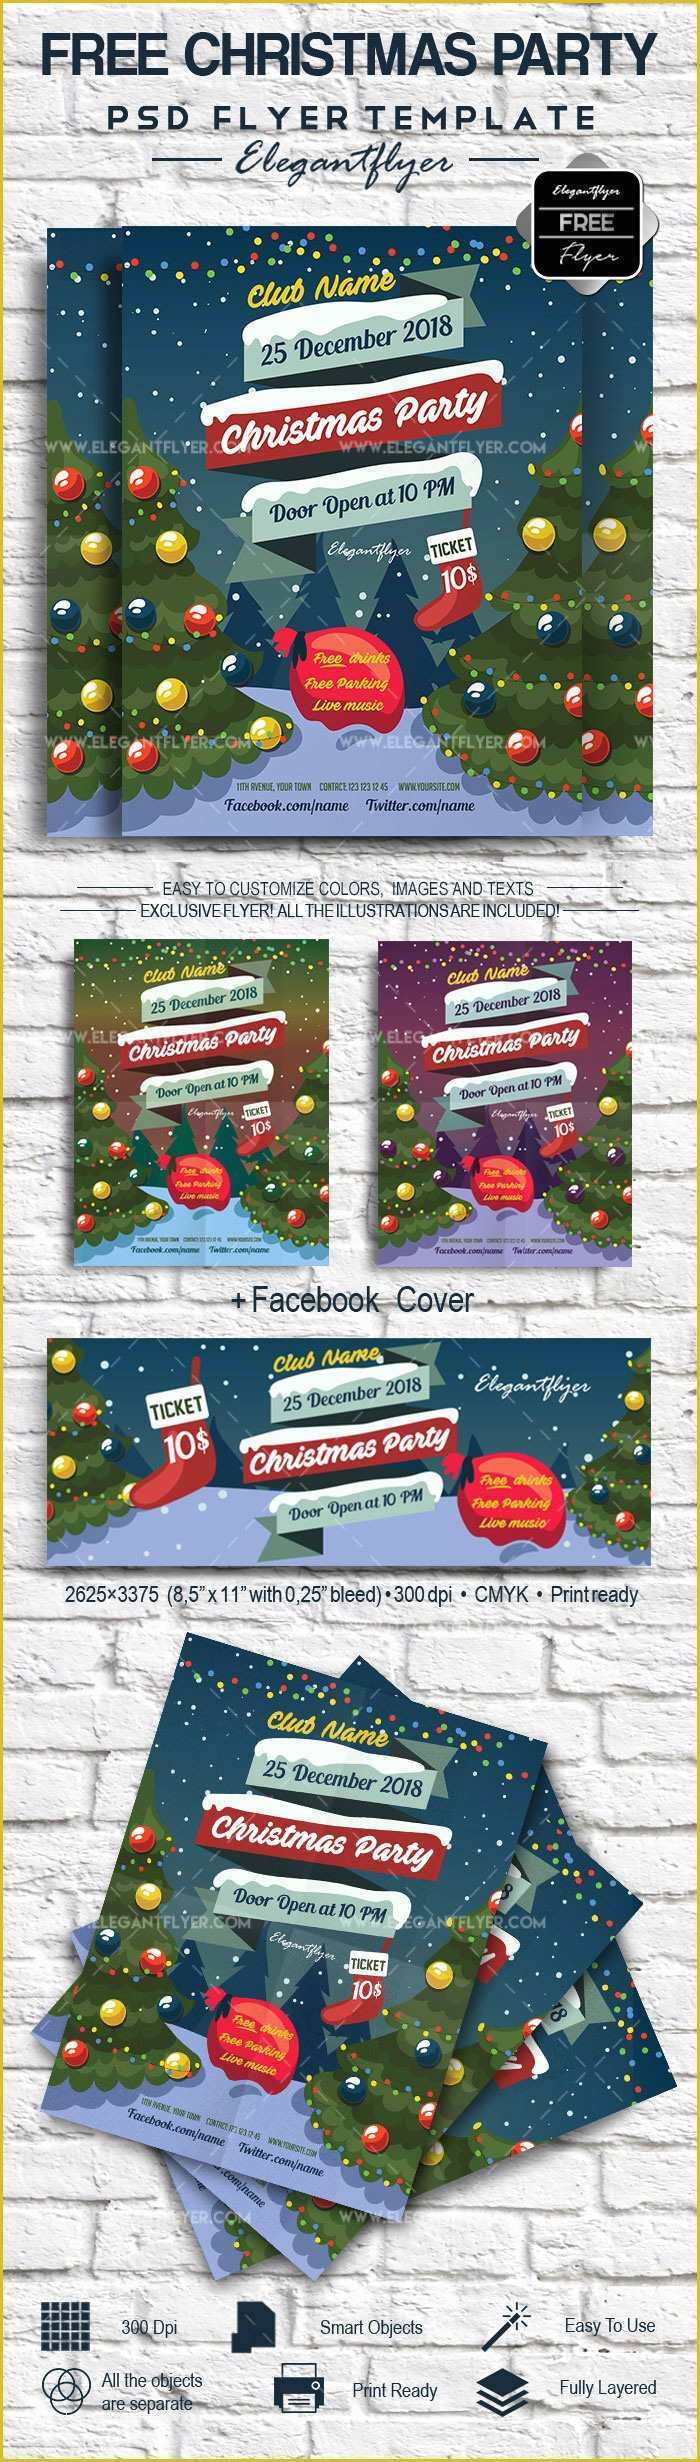 Free Christmas Flyer Templates Psd Of Psd Flyer for Christmas Tree Party – by Elegantflyer